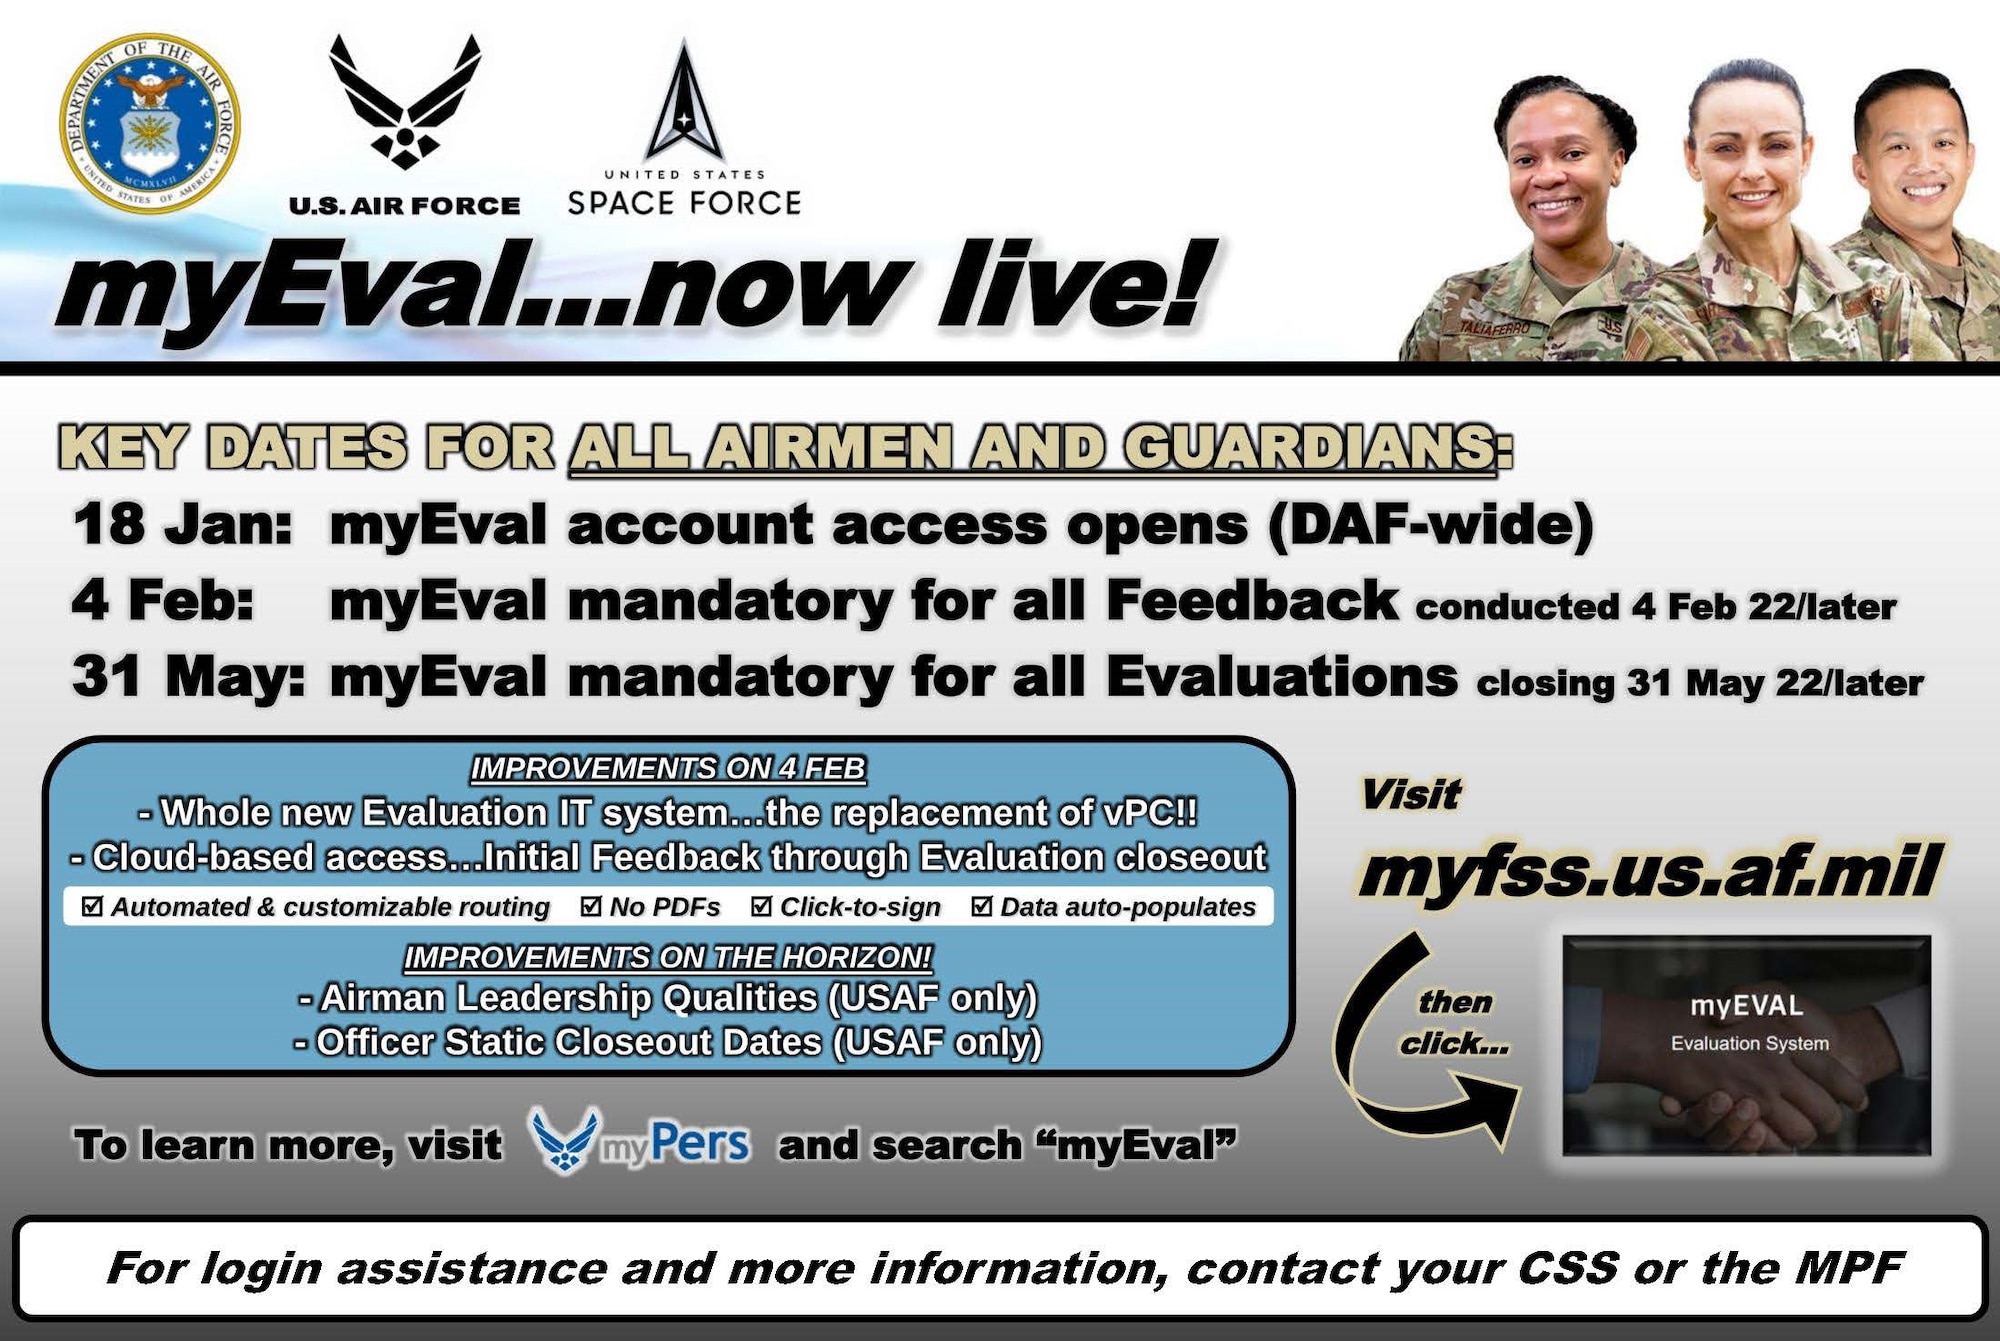 Graphic depicting key dates for myEval implementation with information about myfss.us.af.mil and mypers.af.mil as link on where to find more info.